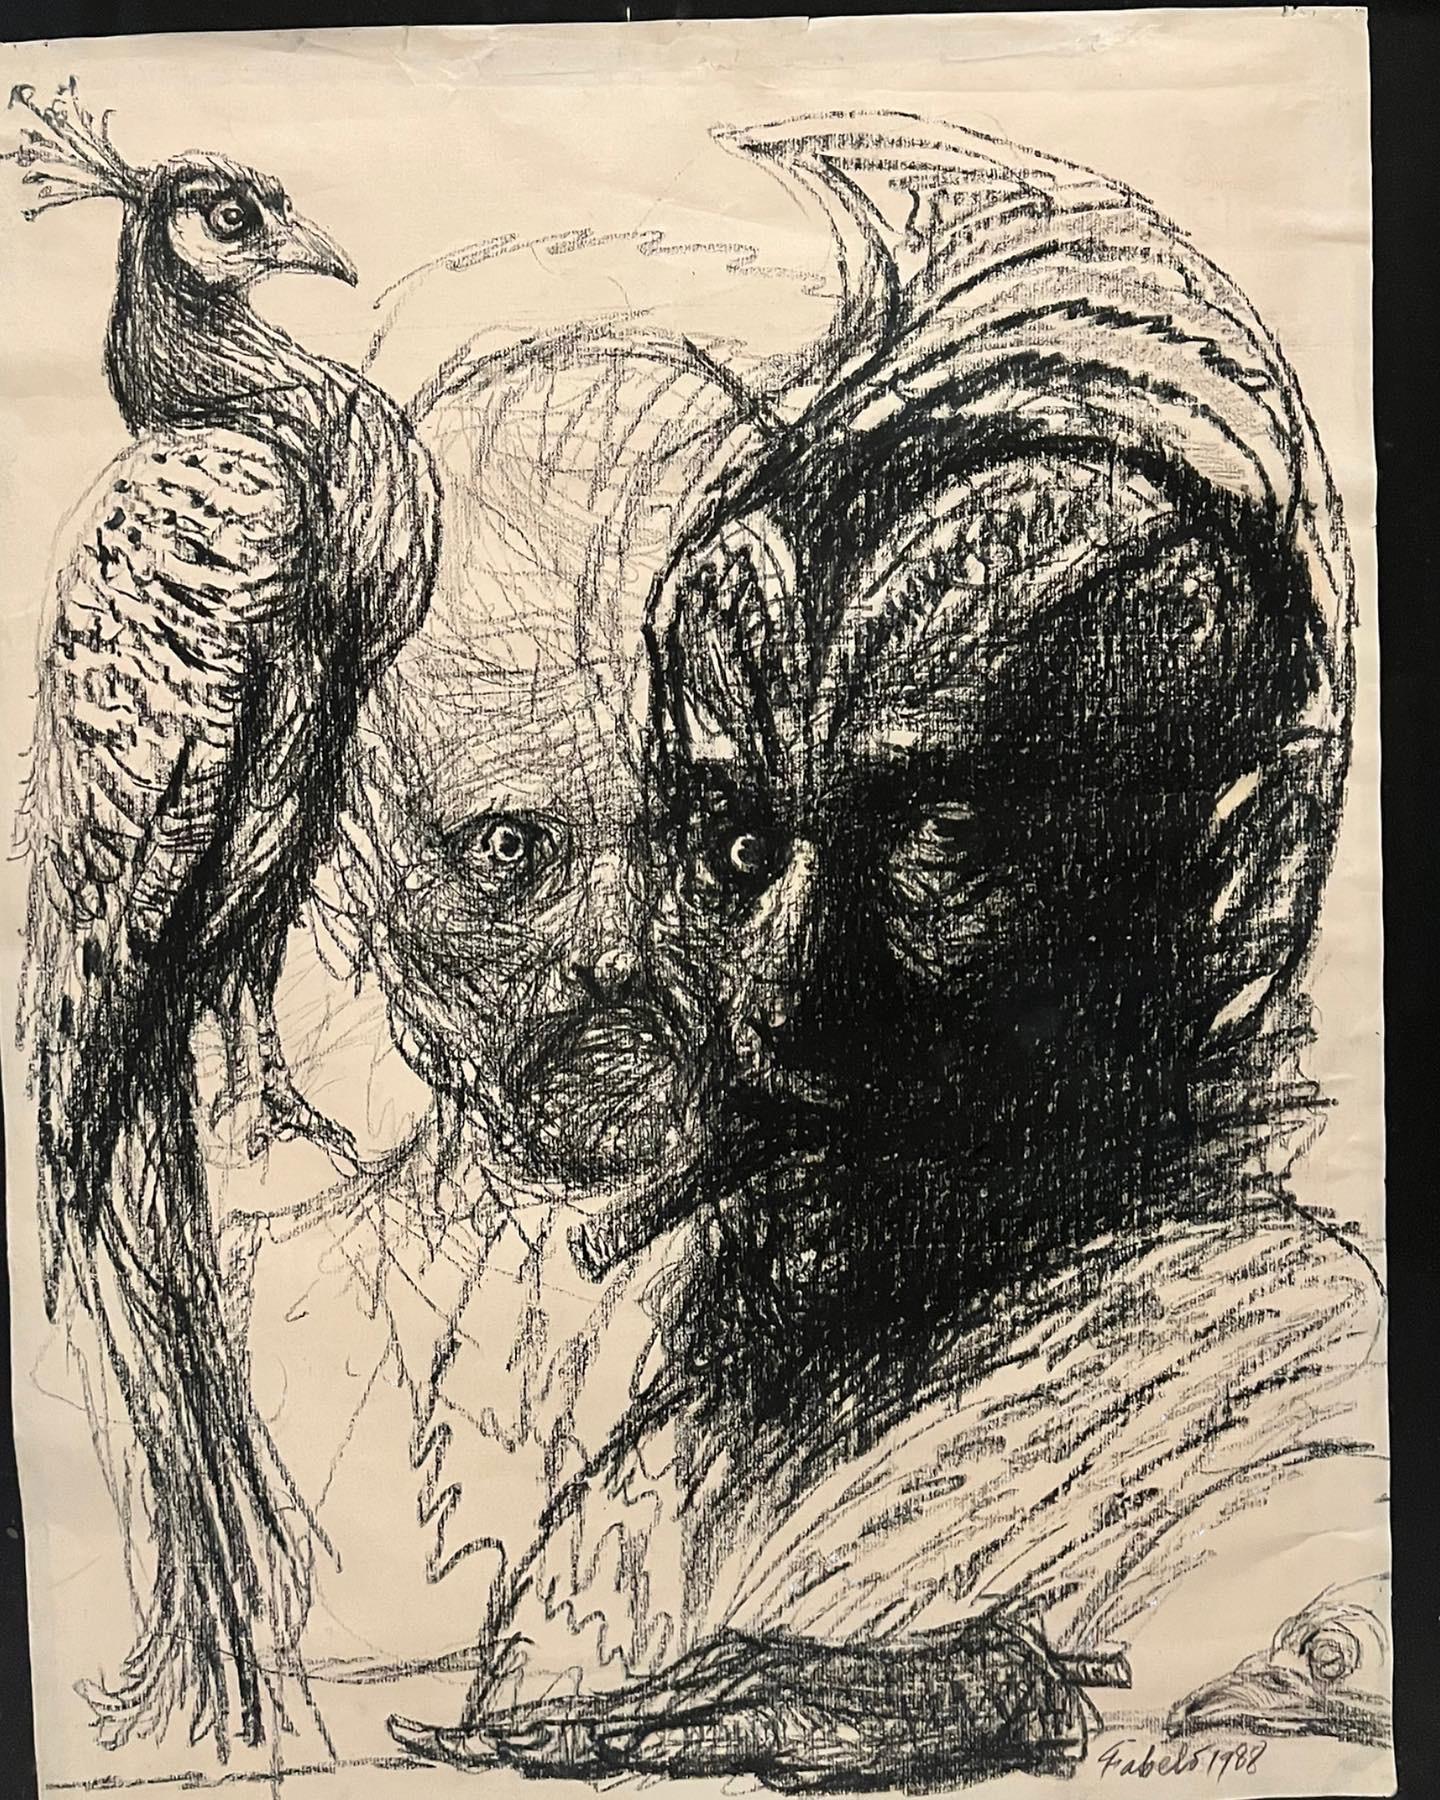 Ink on paper paint by Roberto Fabelo in 1988. The Cuban artist’s self-portrait is behind a darker merman creature and a bird. It is signed and dated by the artist. Roberto Fabelo is one of the most recognized Cuban painter, sculptor, and